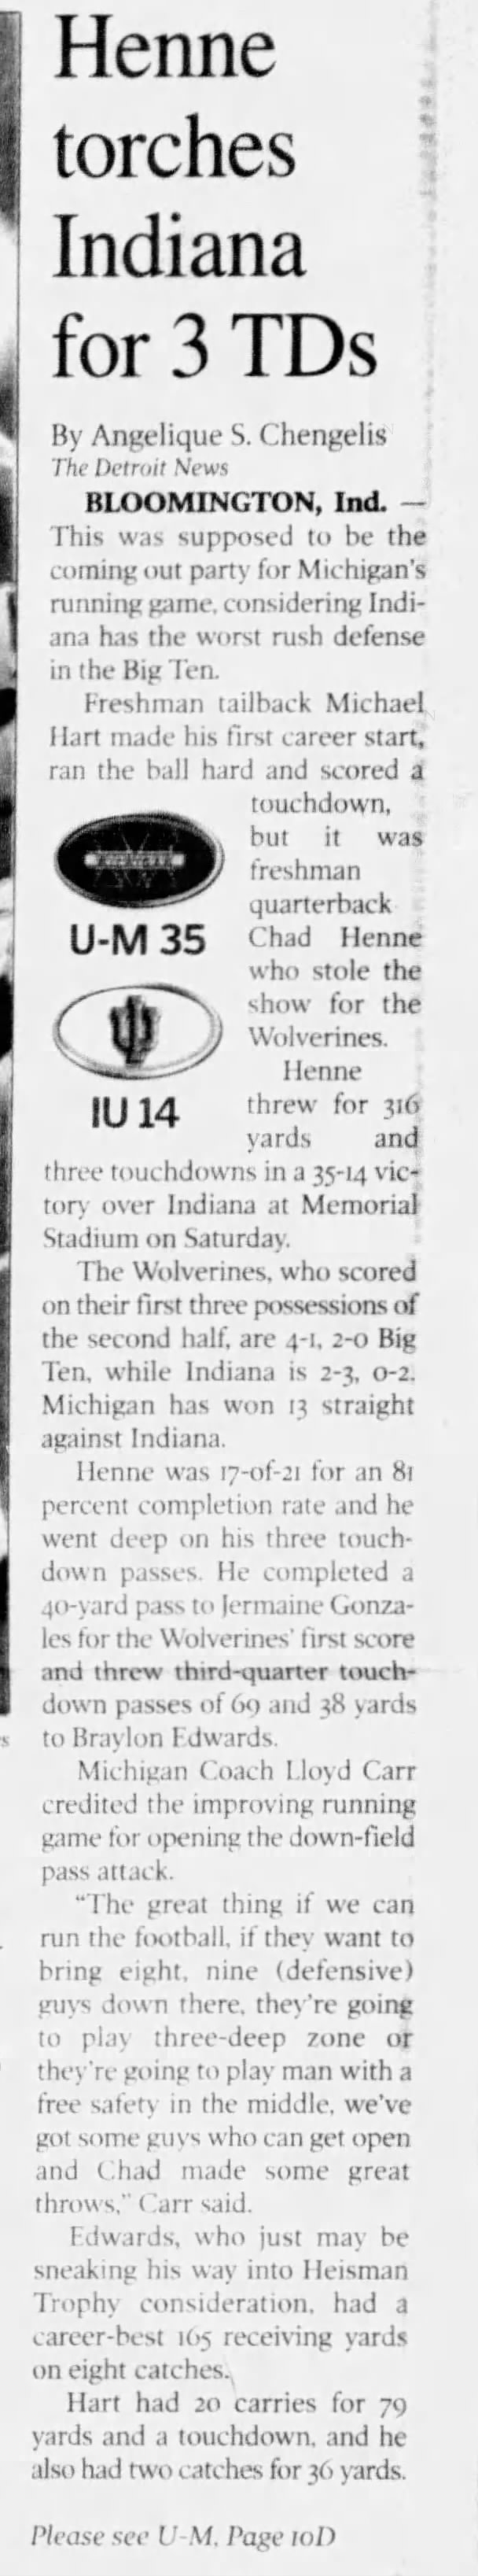 U-M sizzles; Henne torches Indiana for 3 TDs